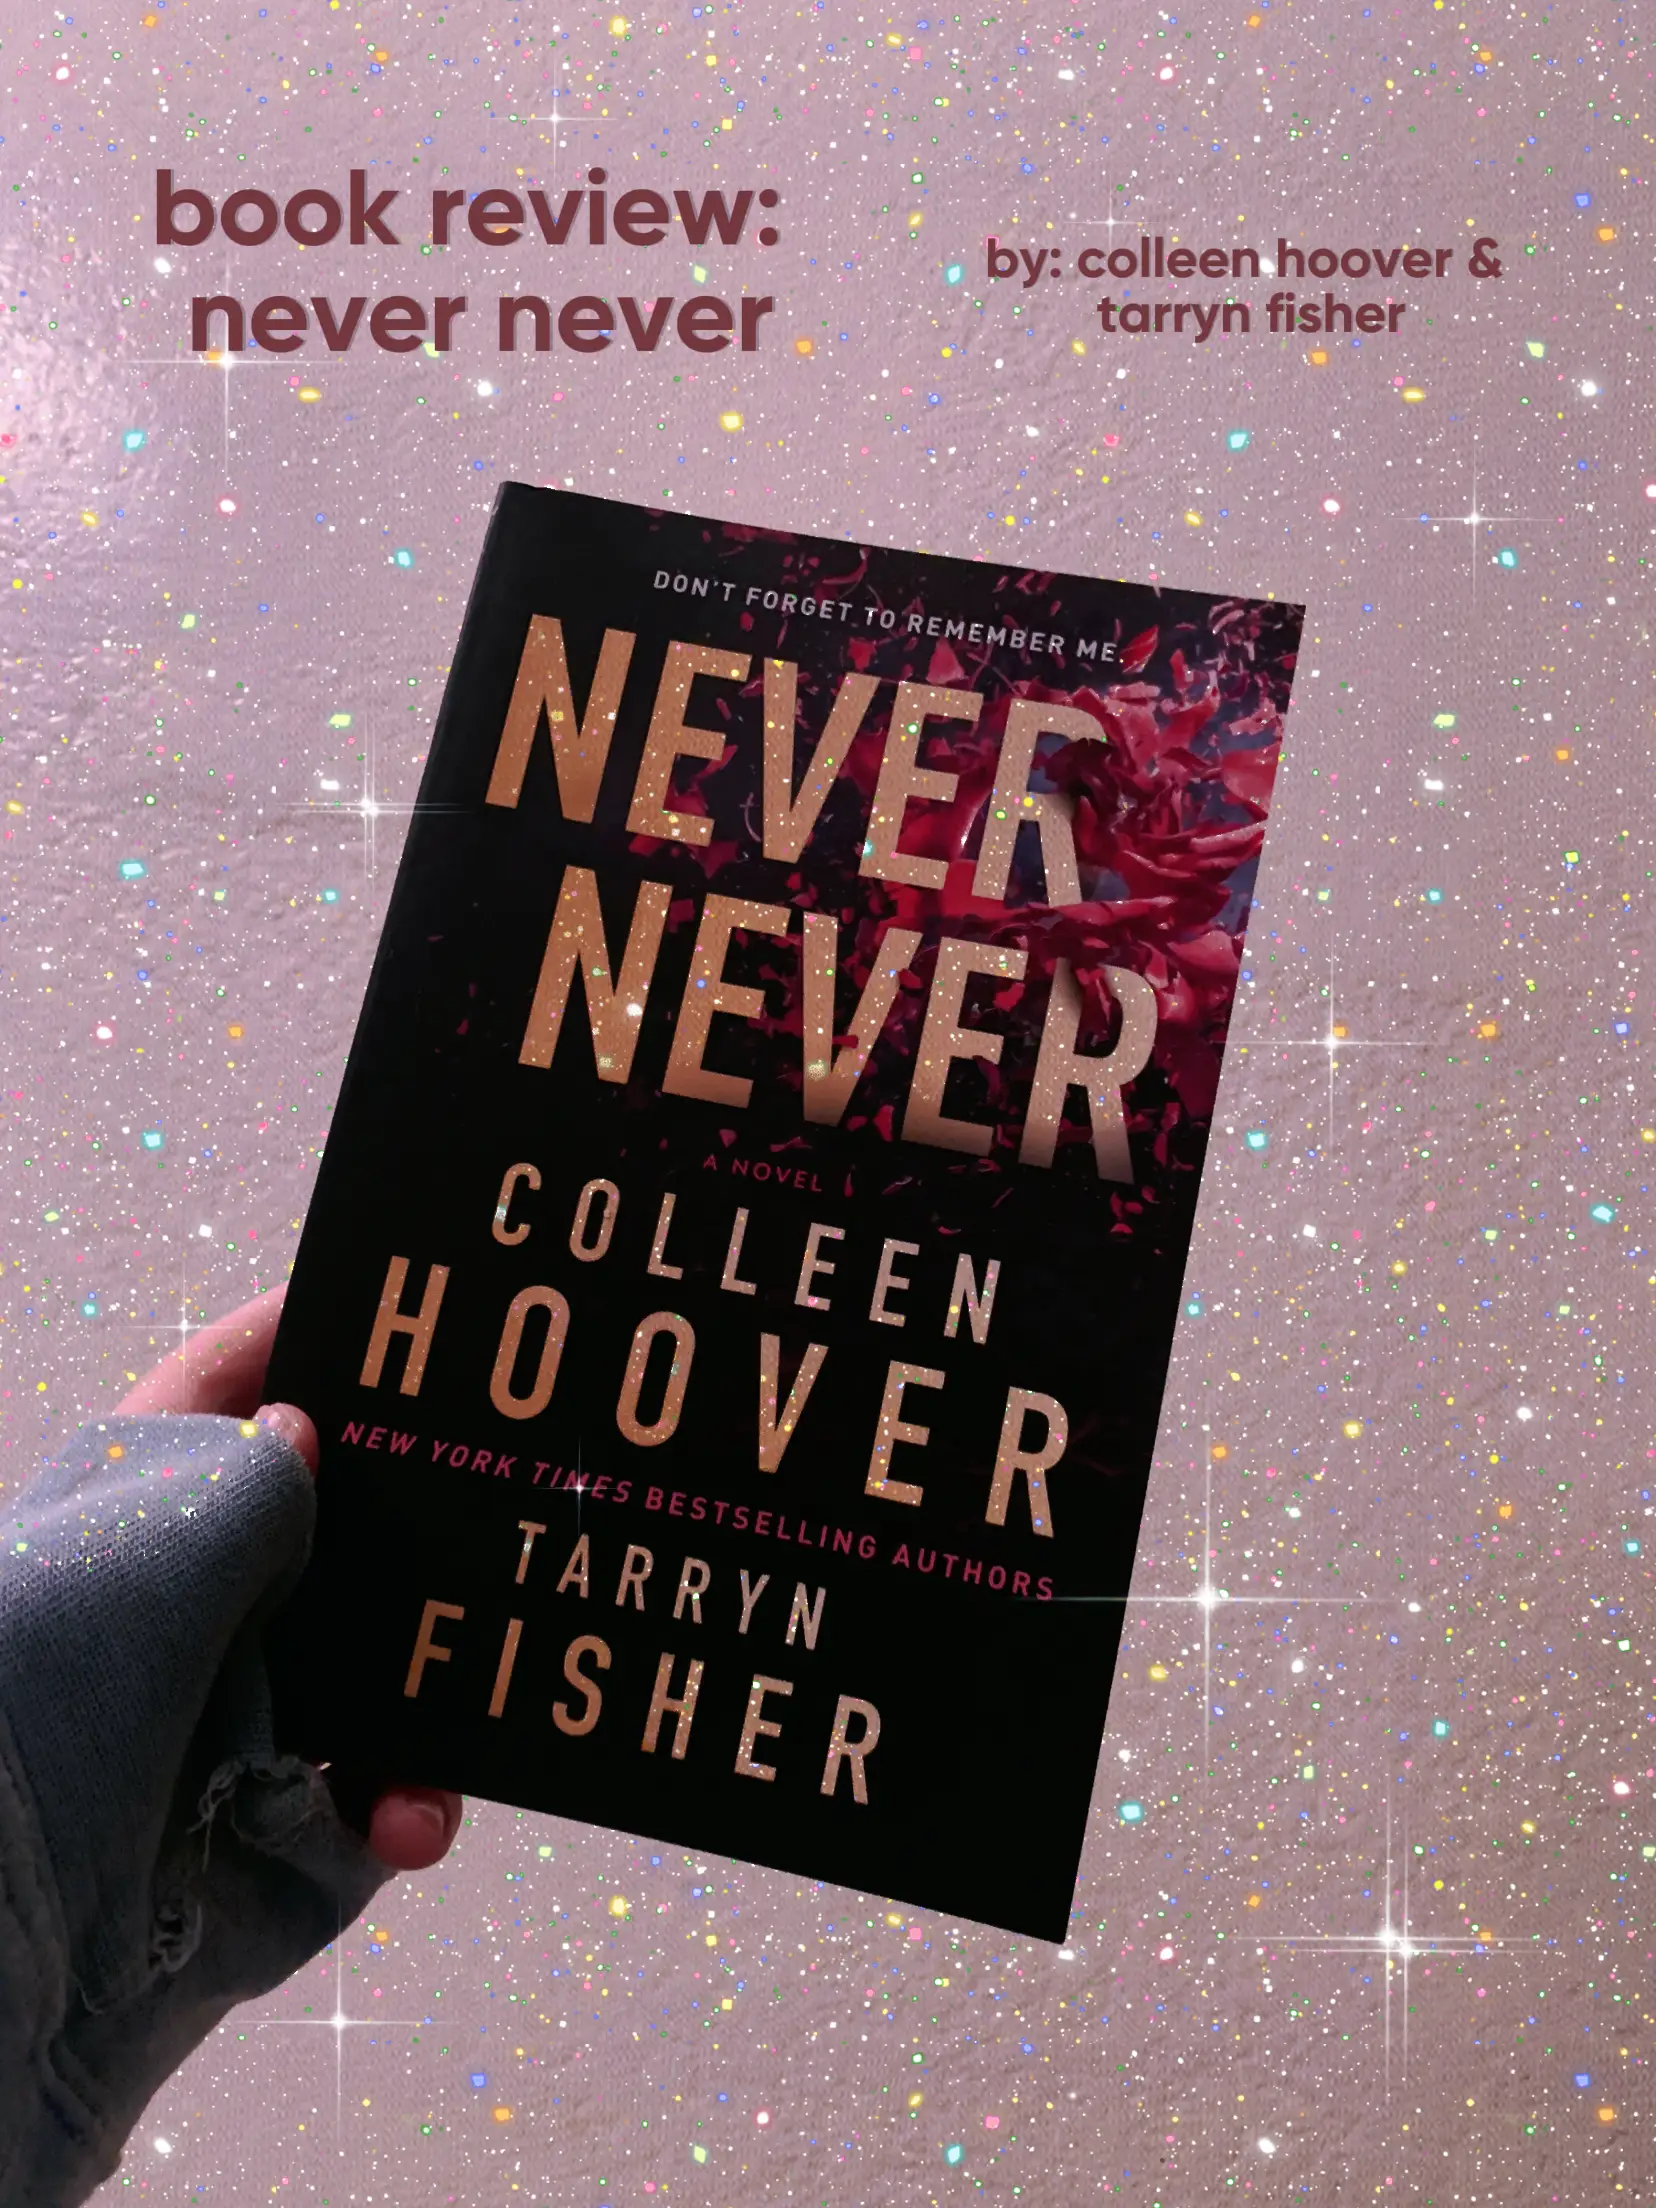 Exploring the Insane World of Colleen Hoover (Part 1) 